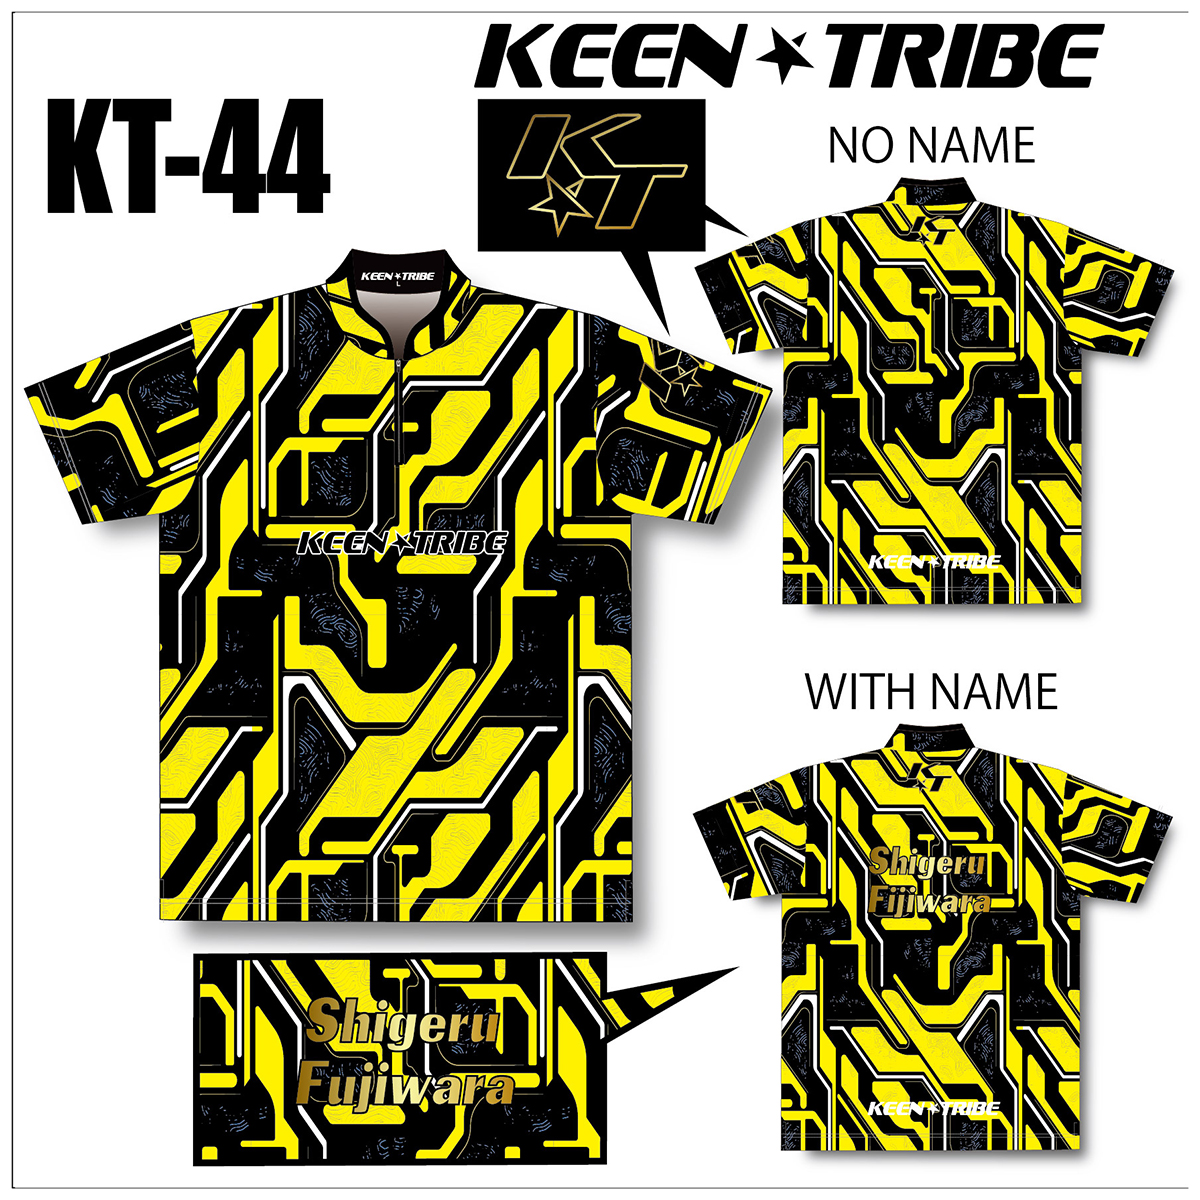 KEEN ★ TRIBE　KT-44(受注生産)